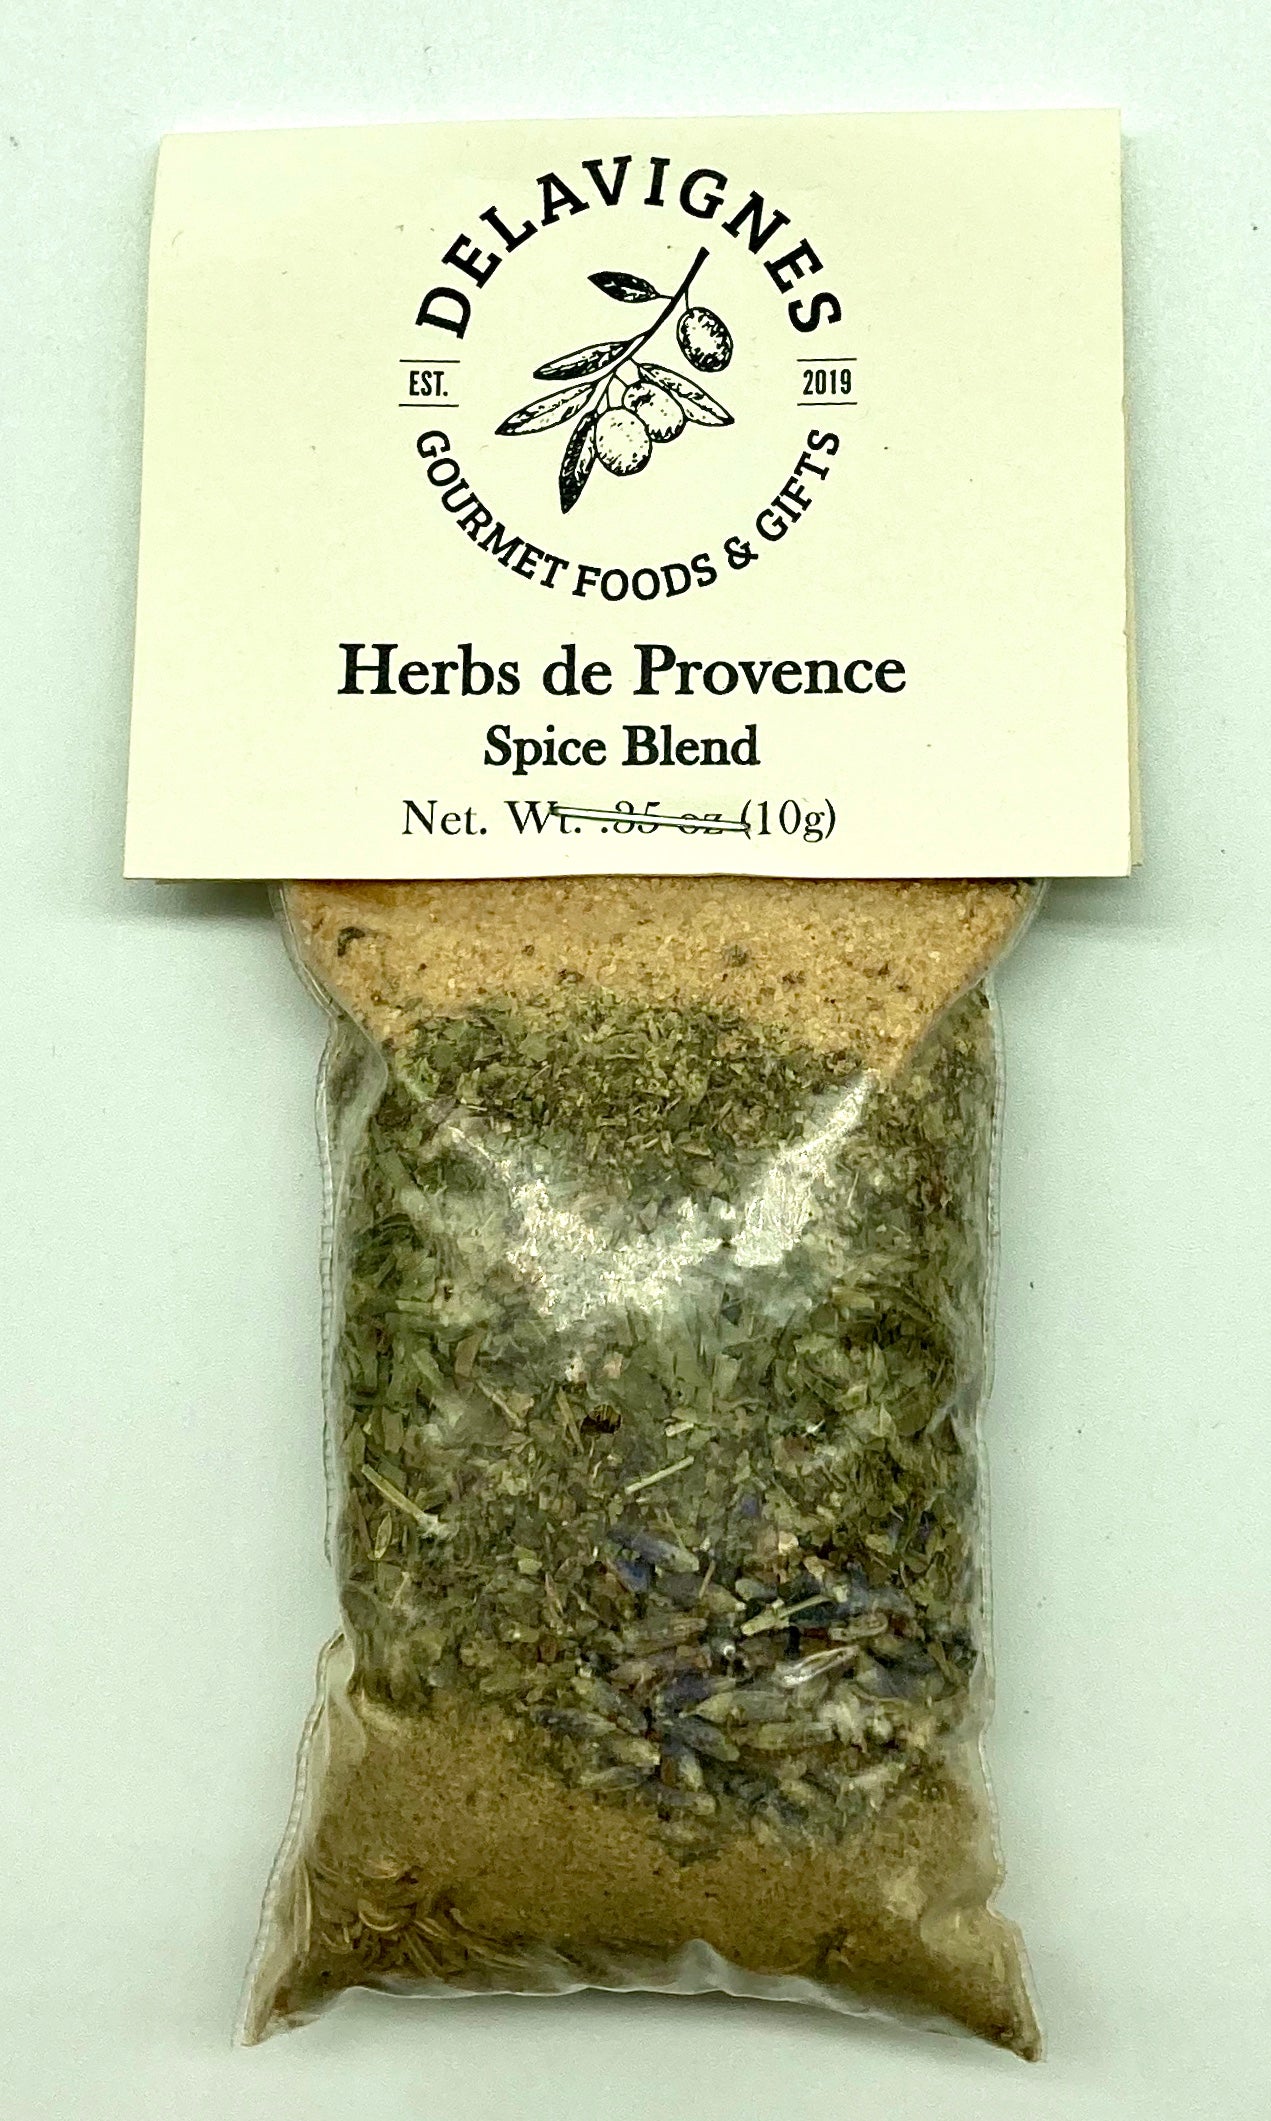 What Is Herbs de Provence?